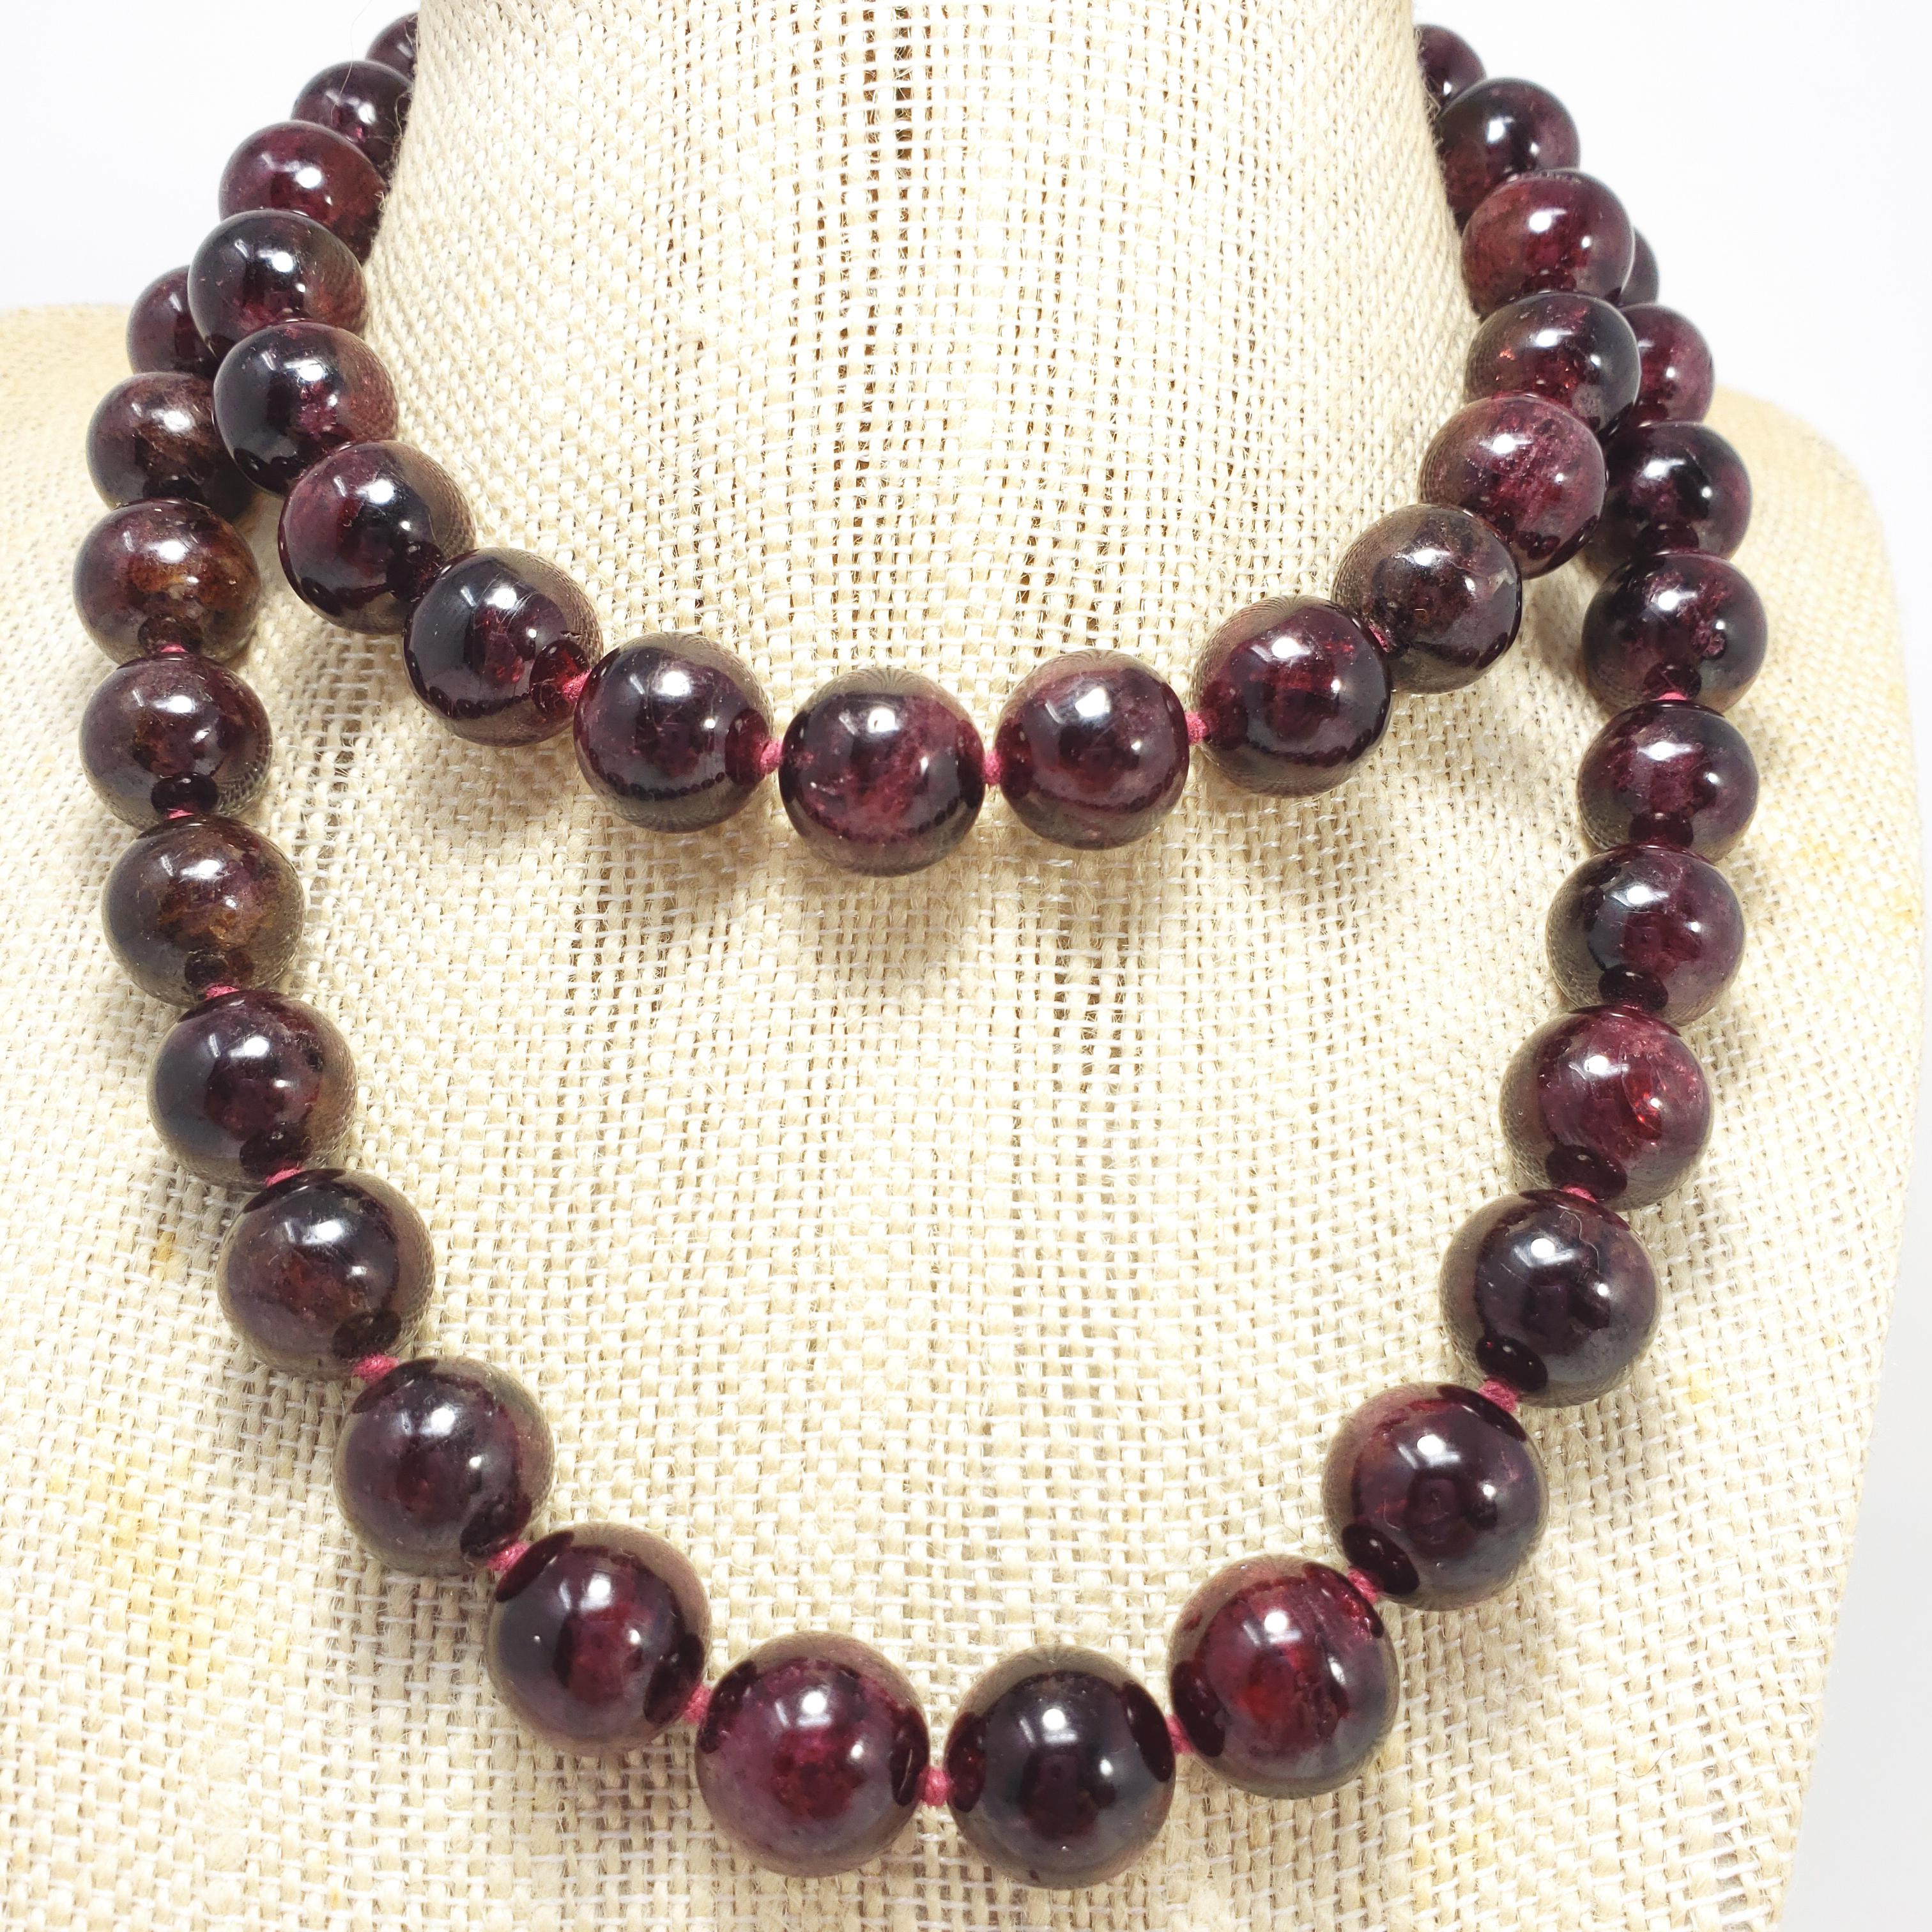 Garnet 12.5mm Bead Knotted String Necklace, Sterling Silver S Hook ...